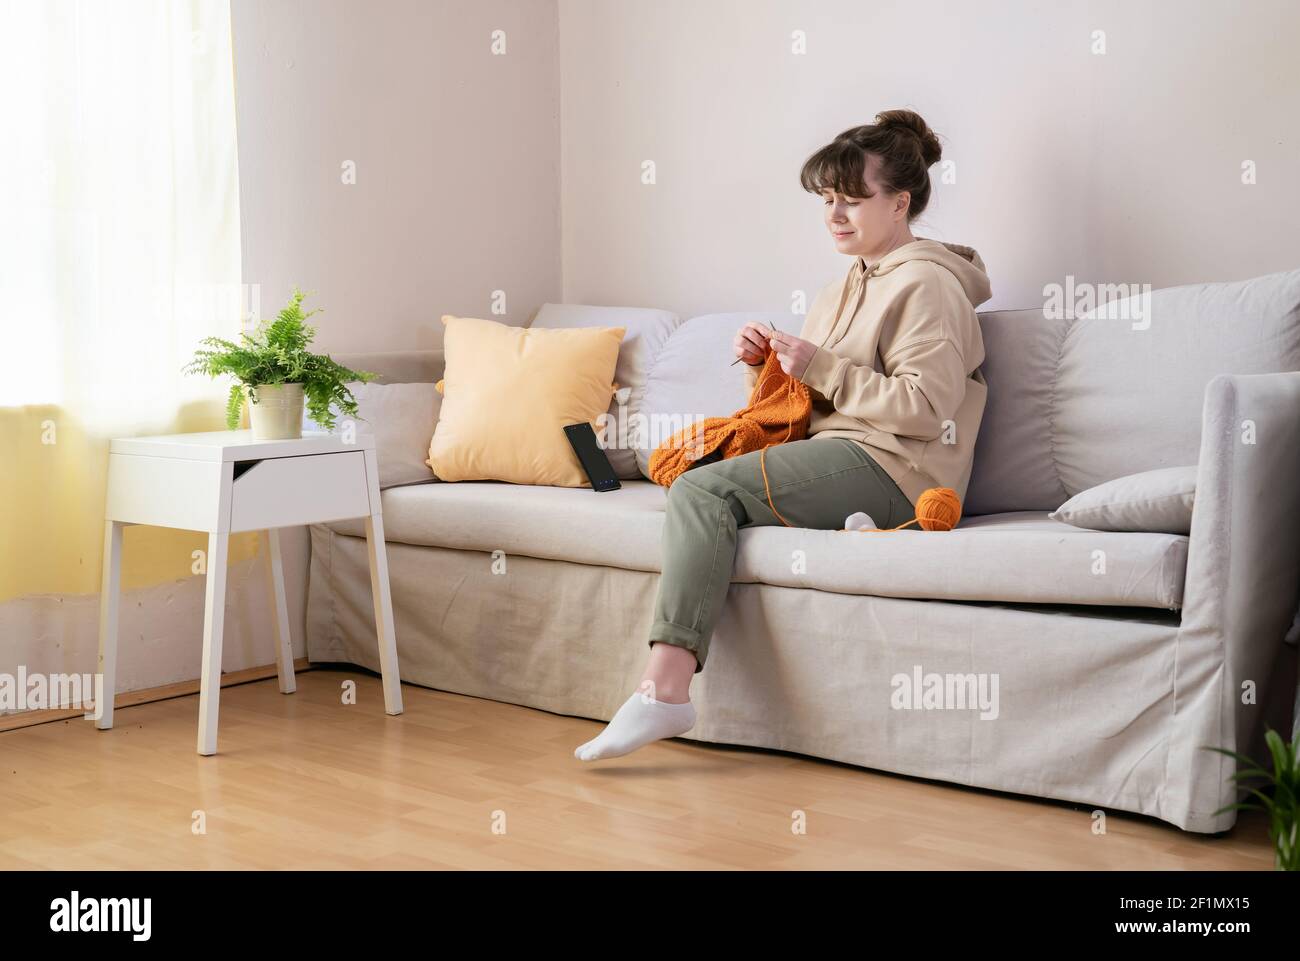 Young woman knitting on sofa at home Stock Photo